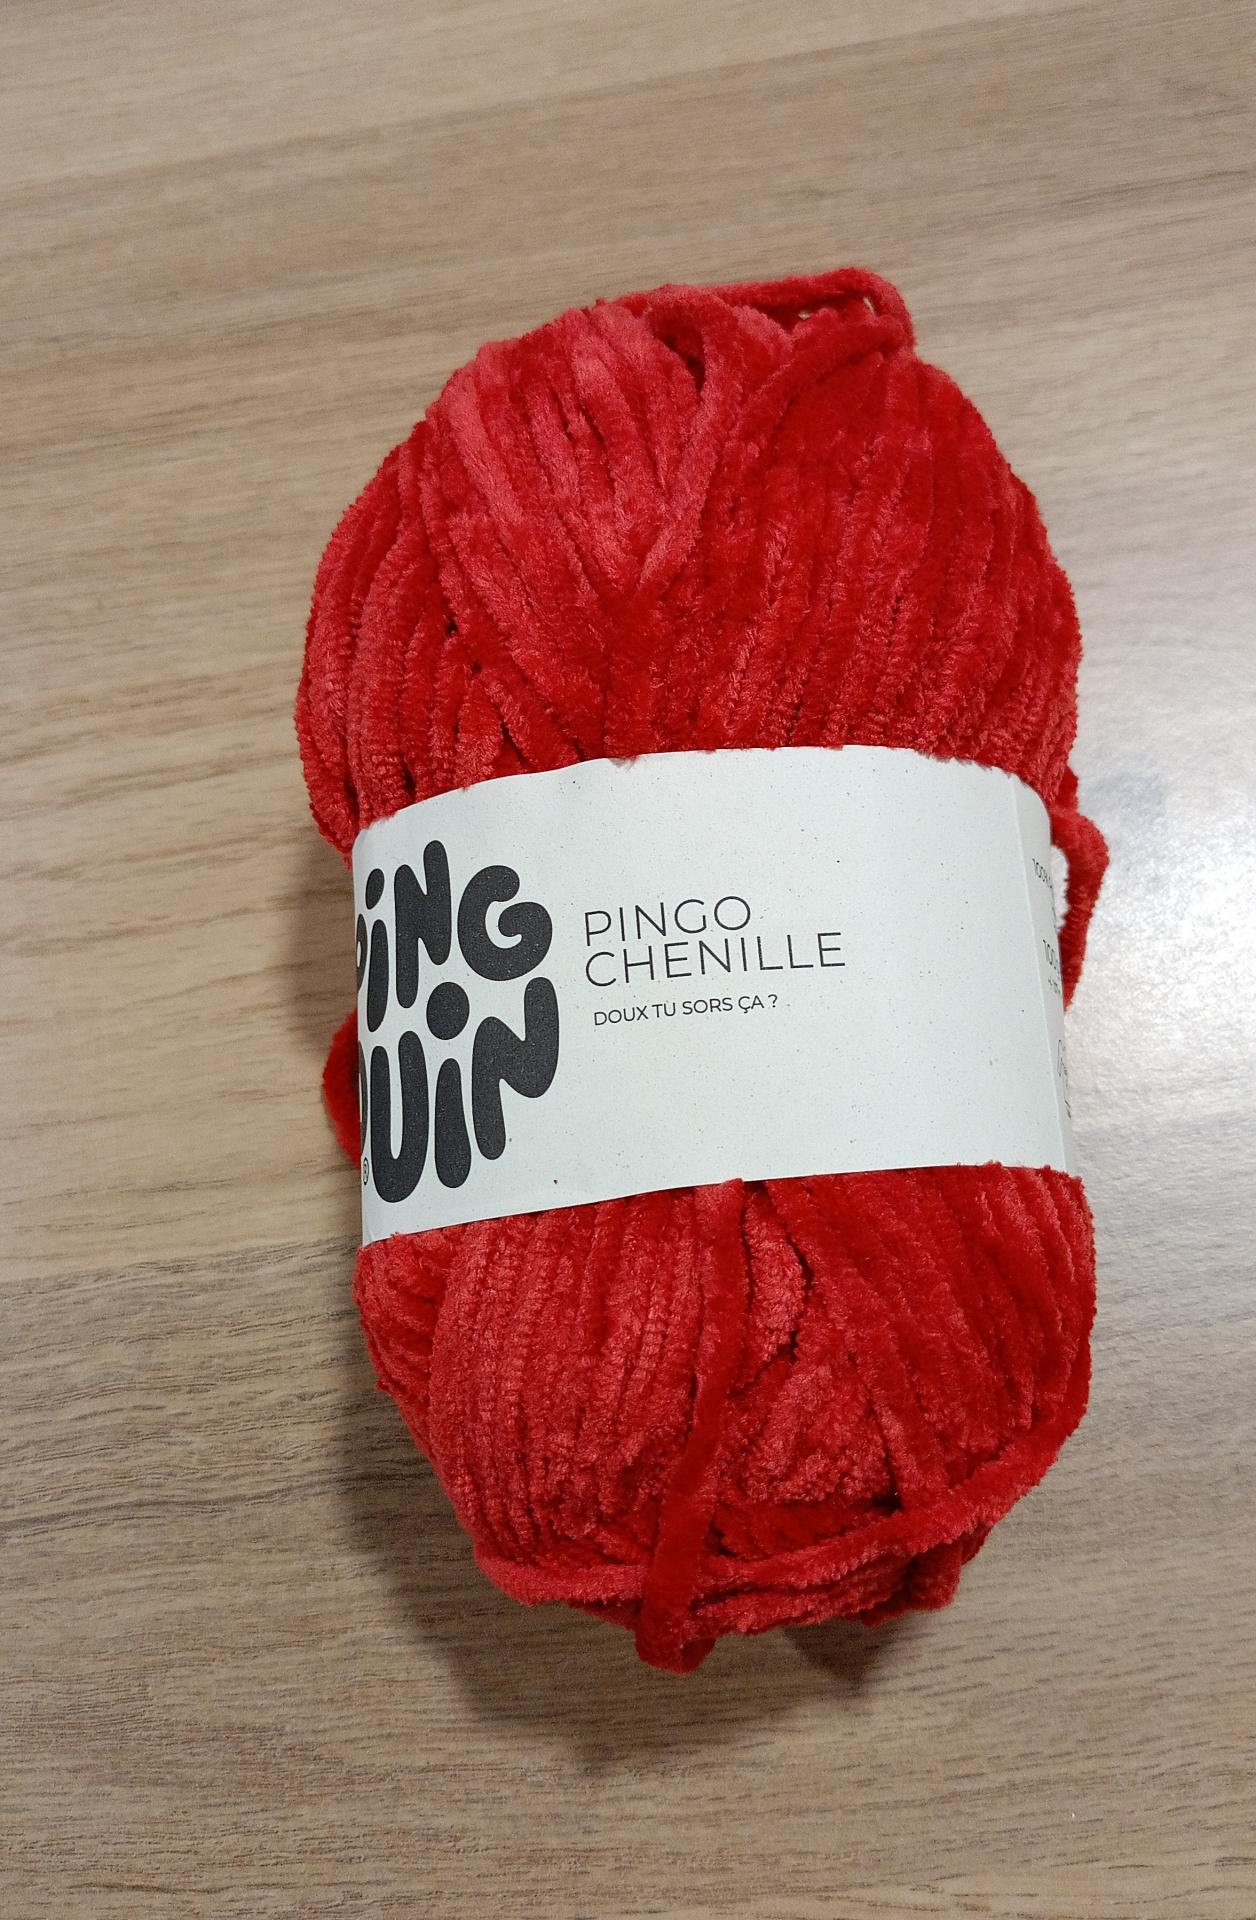 Chenille rouge